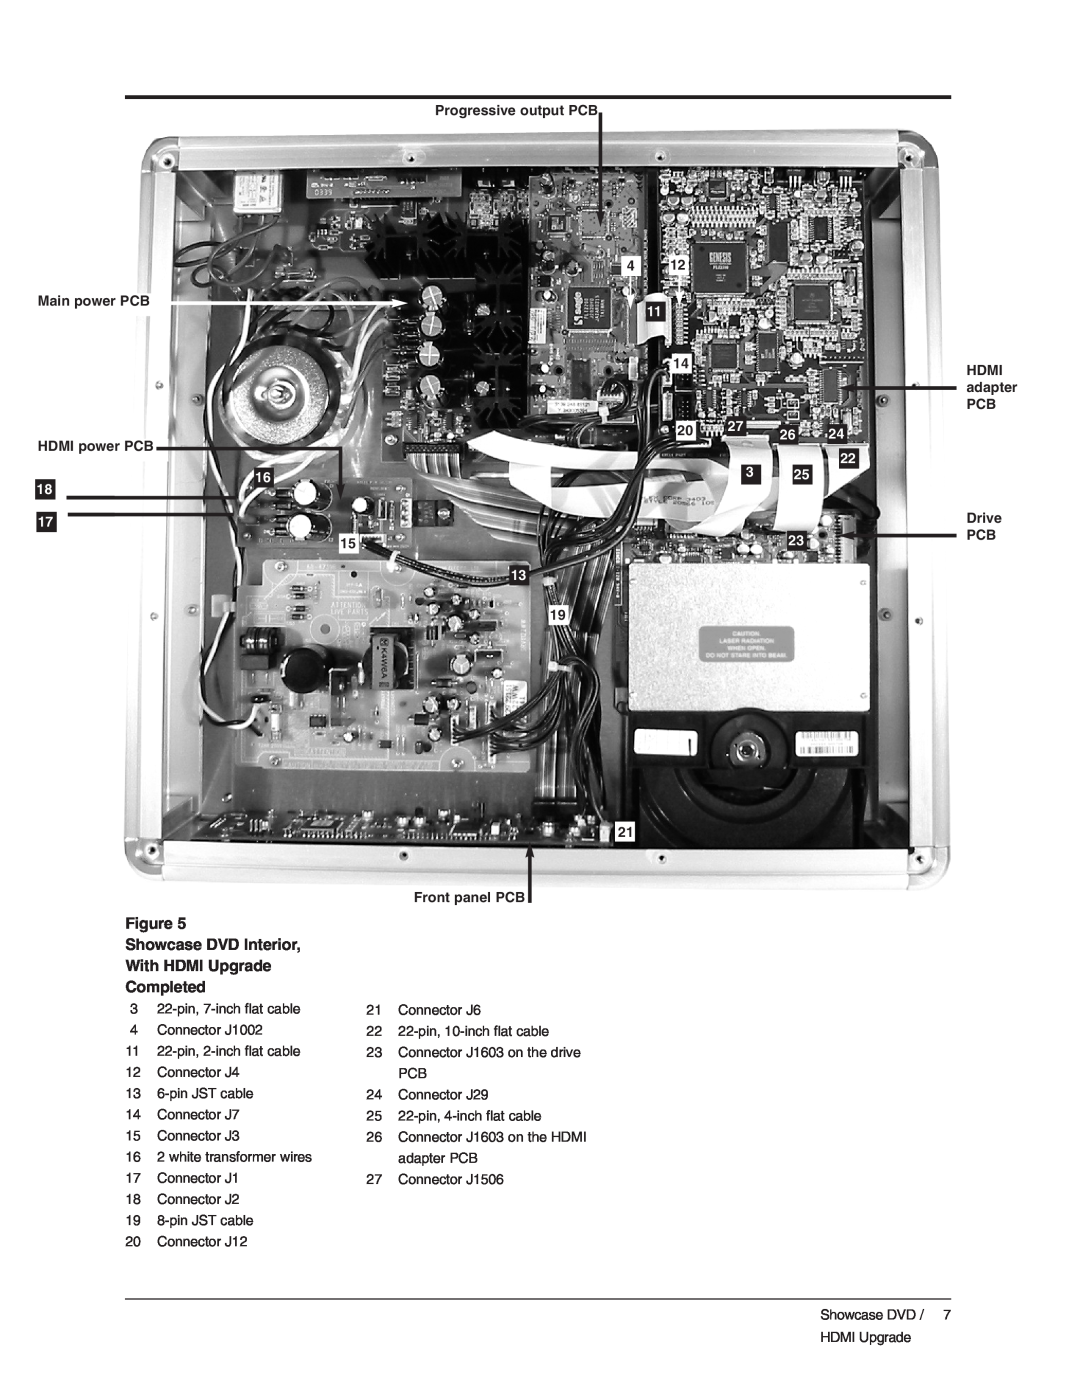 Krell Industries DVD Player manual Showcase DVD Interior With HDMI Upgrade Completed, Progressive output PCB, 20 27 26 